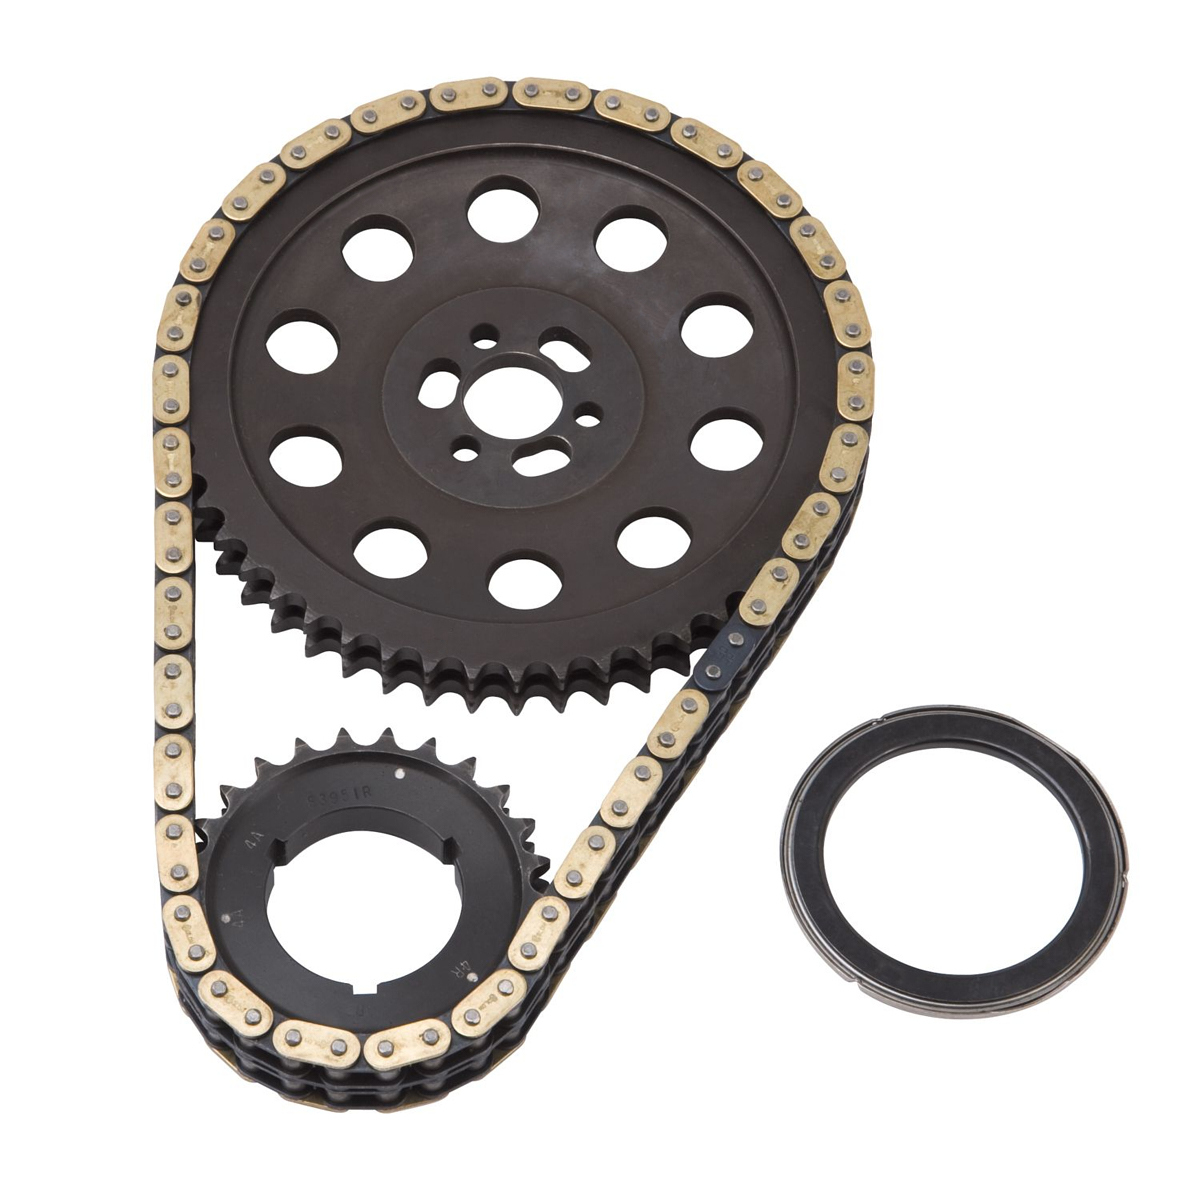 Edelbrock 7801 Performer-Link Timing Chain and Gear Set 